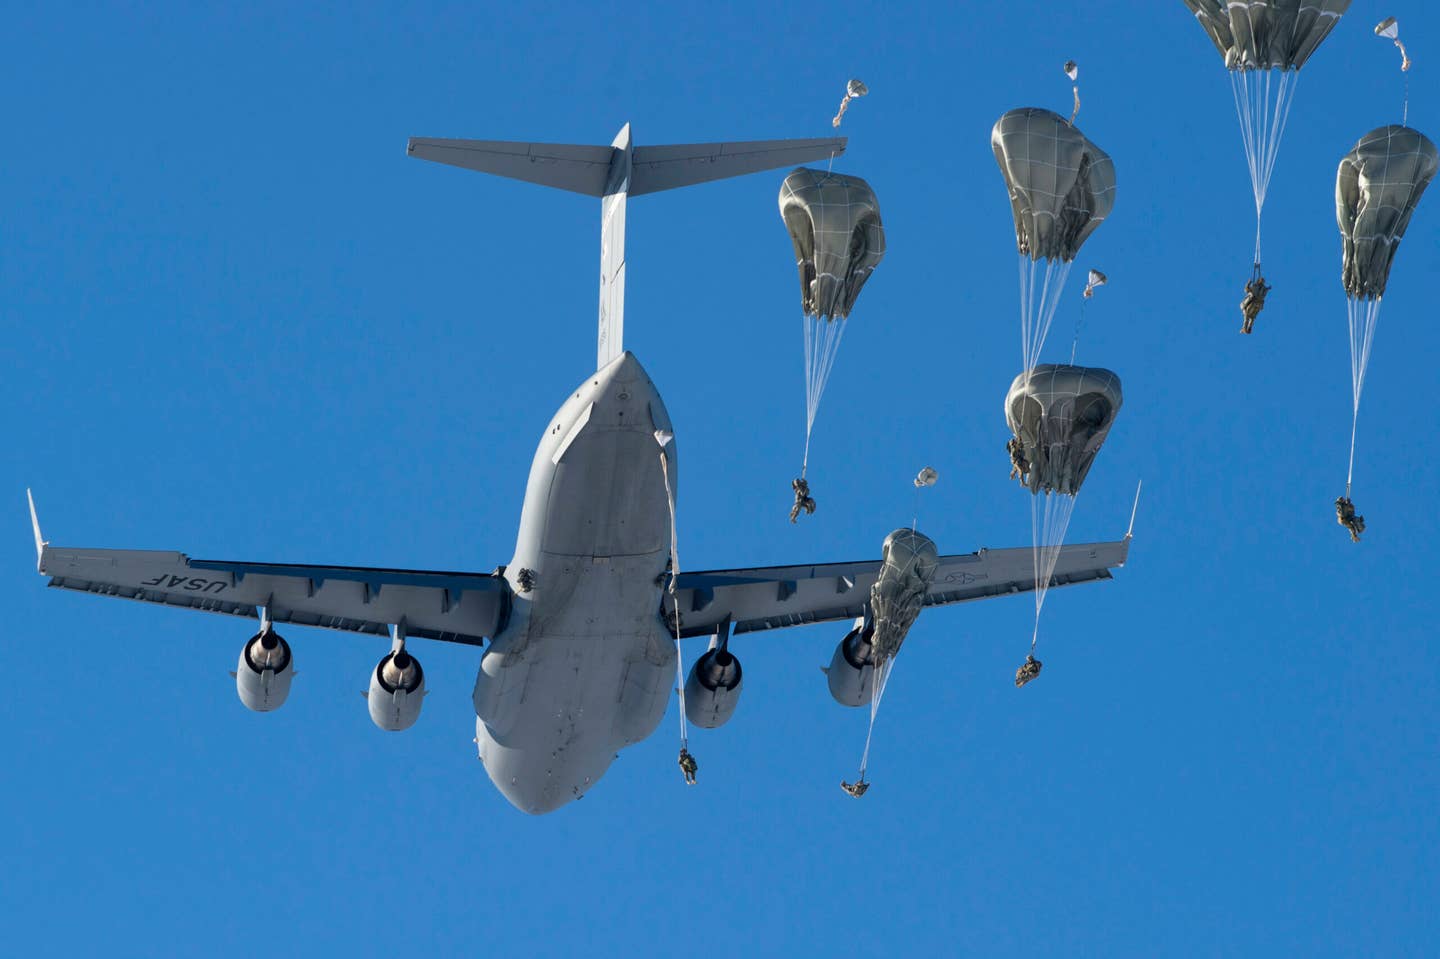 U.S. Army paratroopers assigned to the 4th Infantry Brigade Combat Team (Airborne), 25th Infantry Division, U.S. Army Alaska, jump from an Air Force C-17 Globemaster III with the 3rd Wing during airborne training over Malemute Drop Zone, Joint Base Elmendorf-Richardson, Alaska, March 22, 2018. The Soldiers of 4/25 belong to the only American airborne brigade in the Pacific and are trained to execute airborne maneuvers in extreme cold weather/high altitude environments in support of combat, training and disaster relief operations. (U.S. Air Force photo by Alejandro Peña)